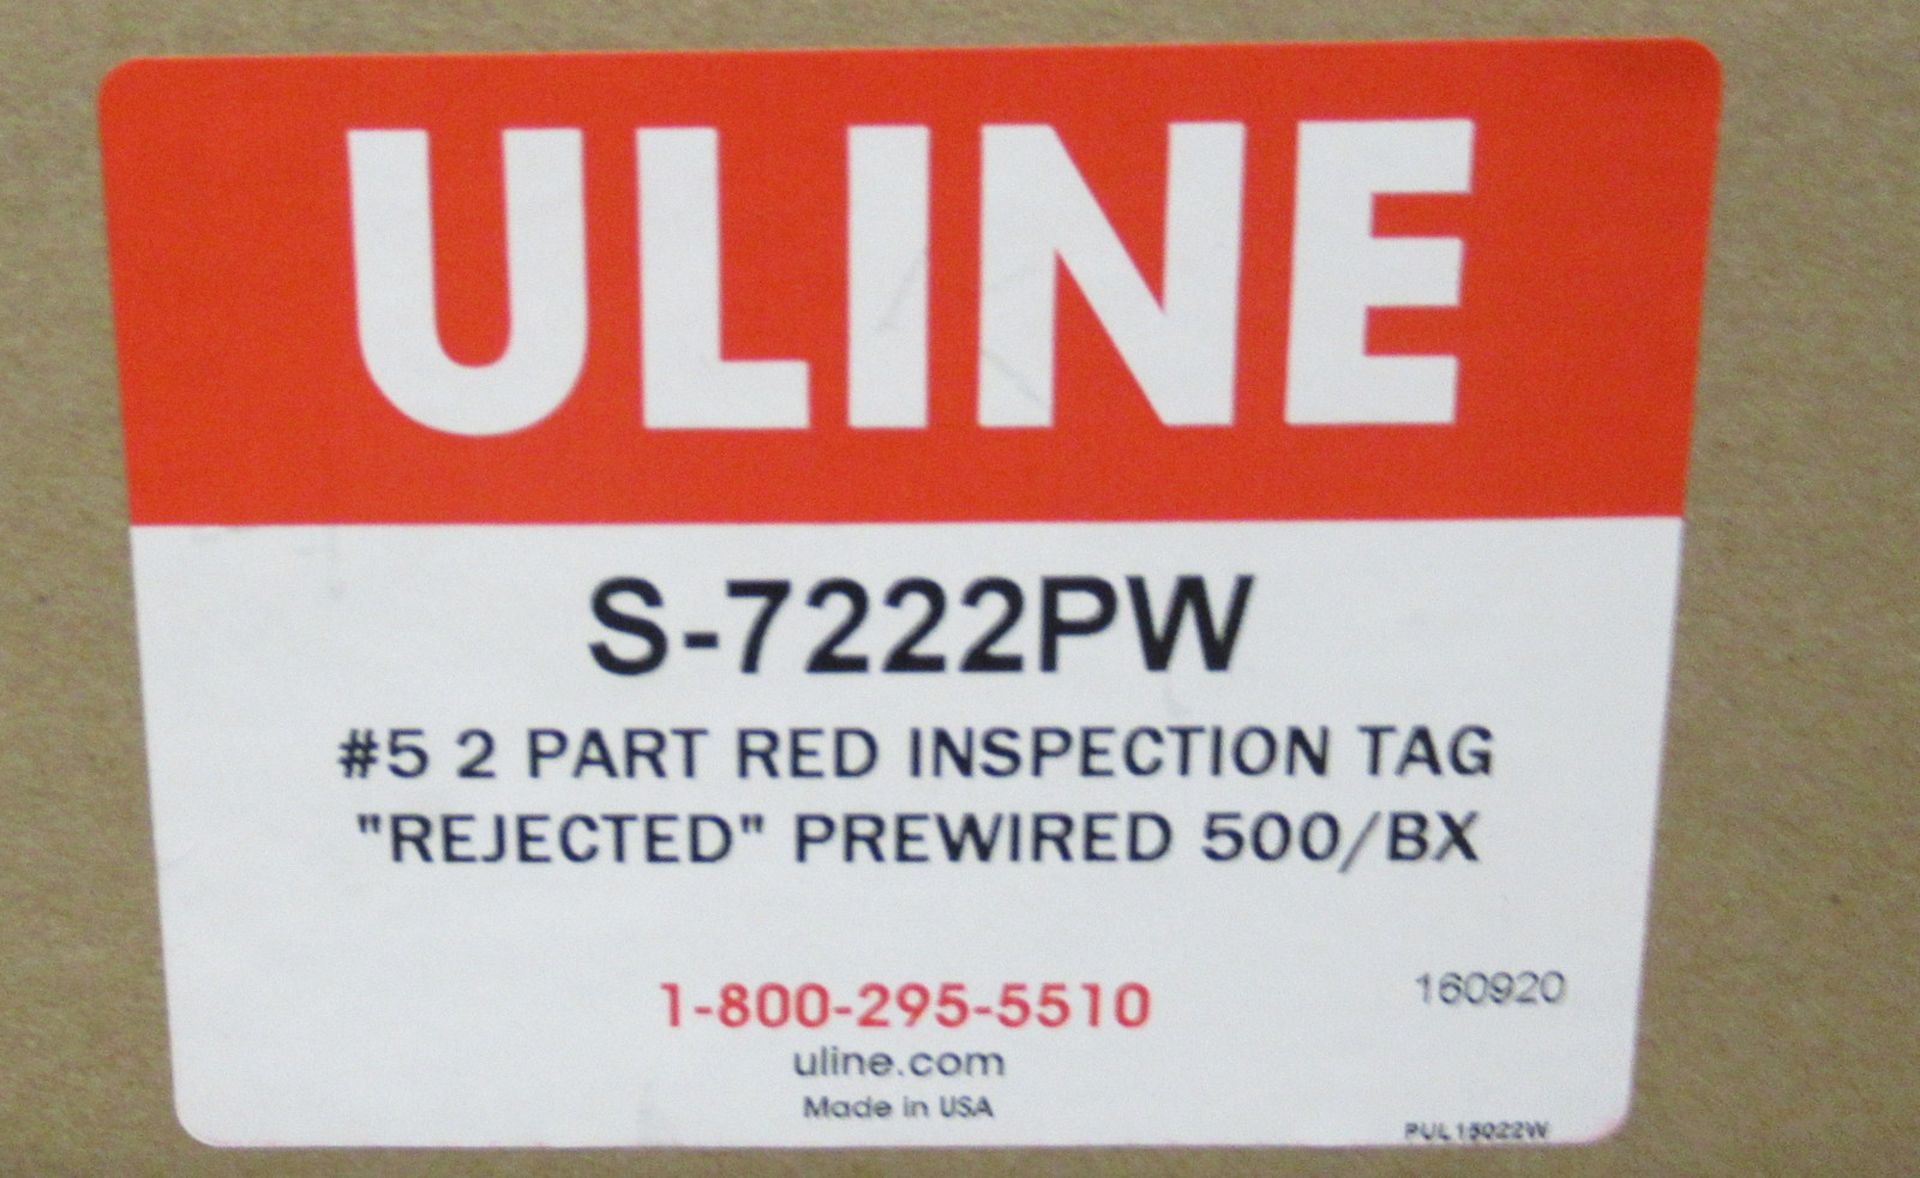 Uline Shipping Shipping Tags, Inspection Tags, Inventory Tags, and Assorted Bags in Different Sizes - Image 3 of 6